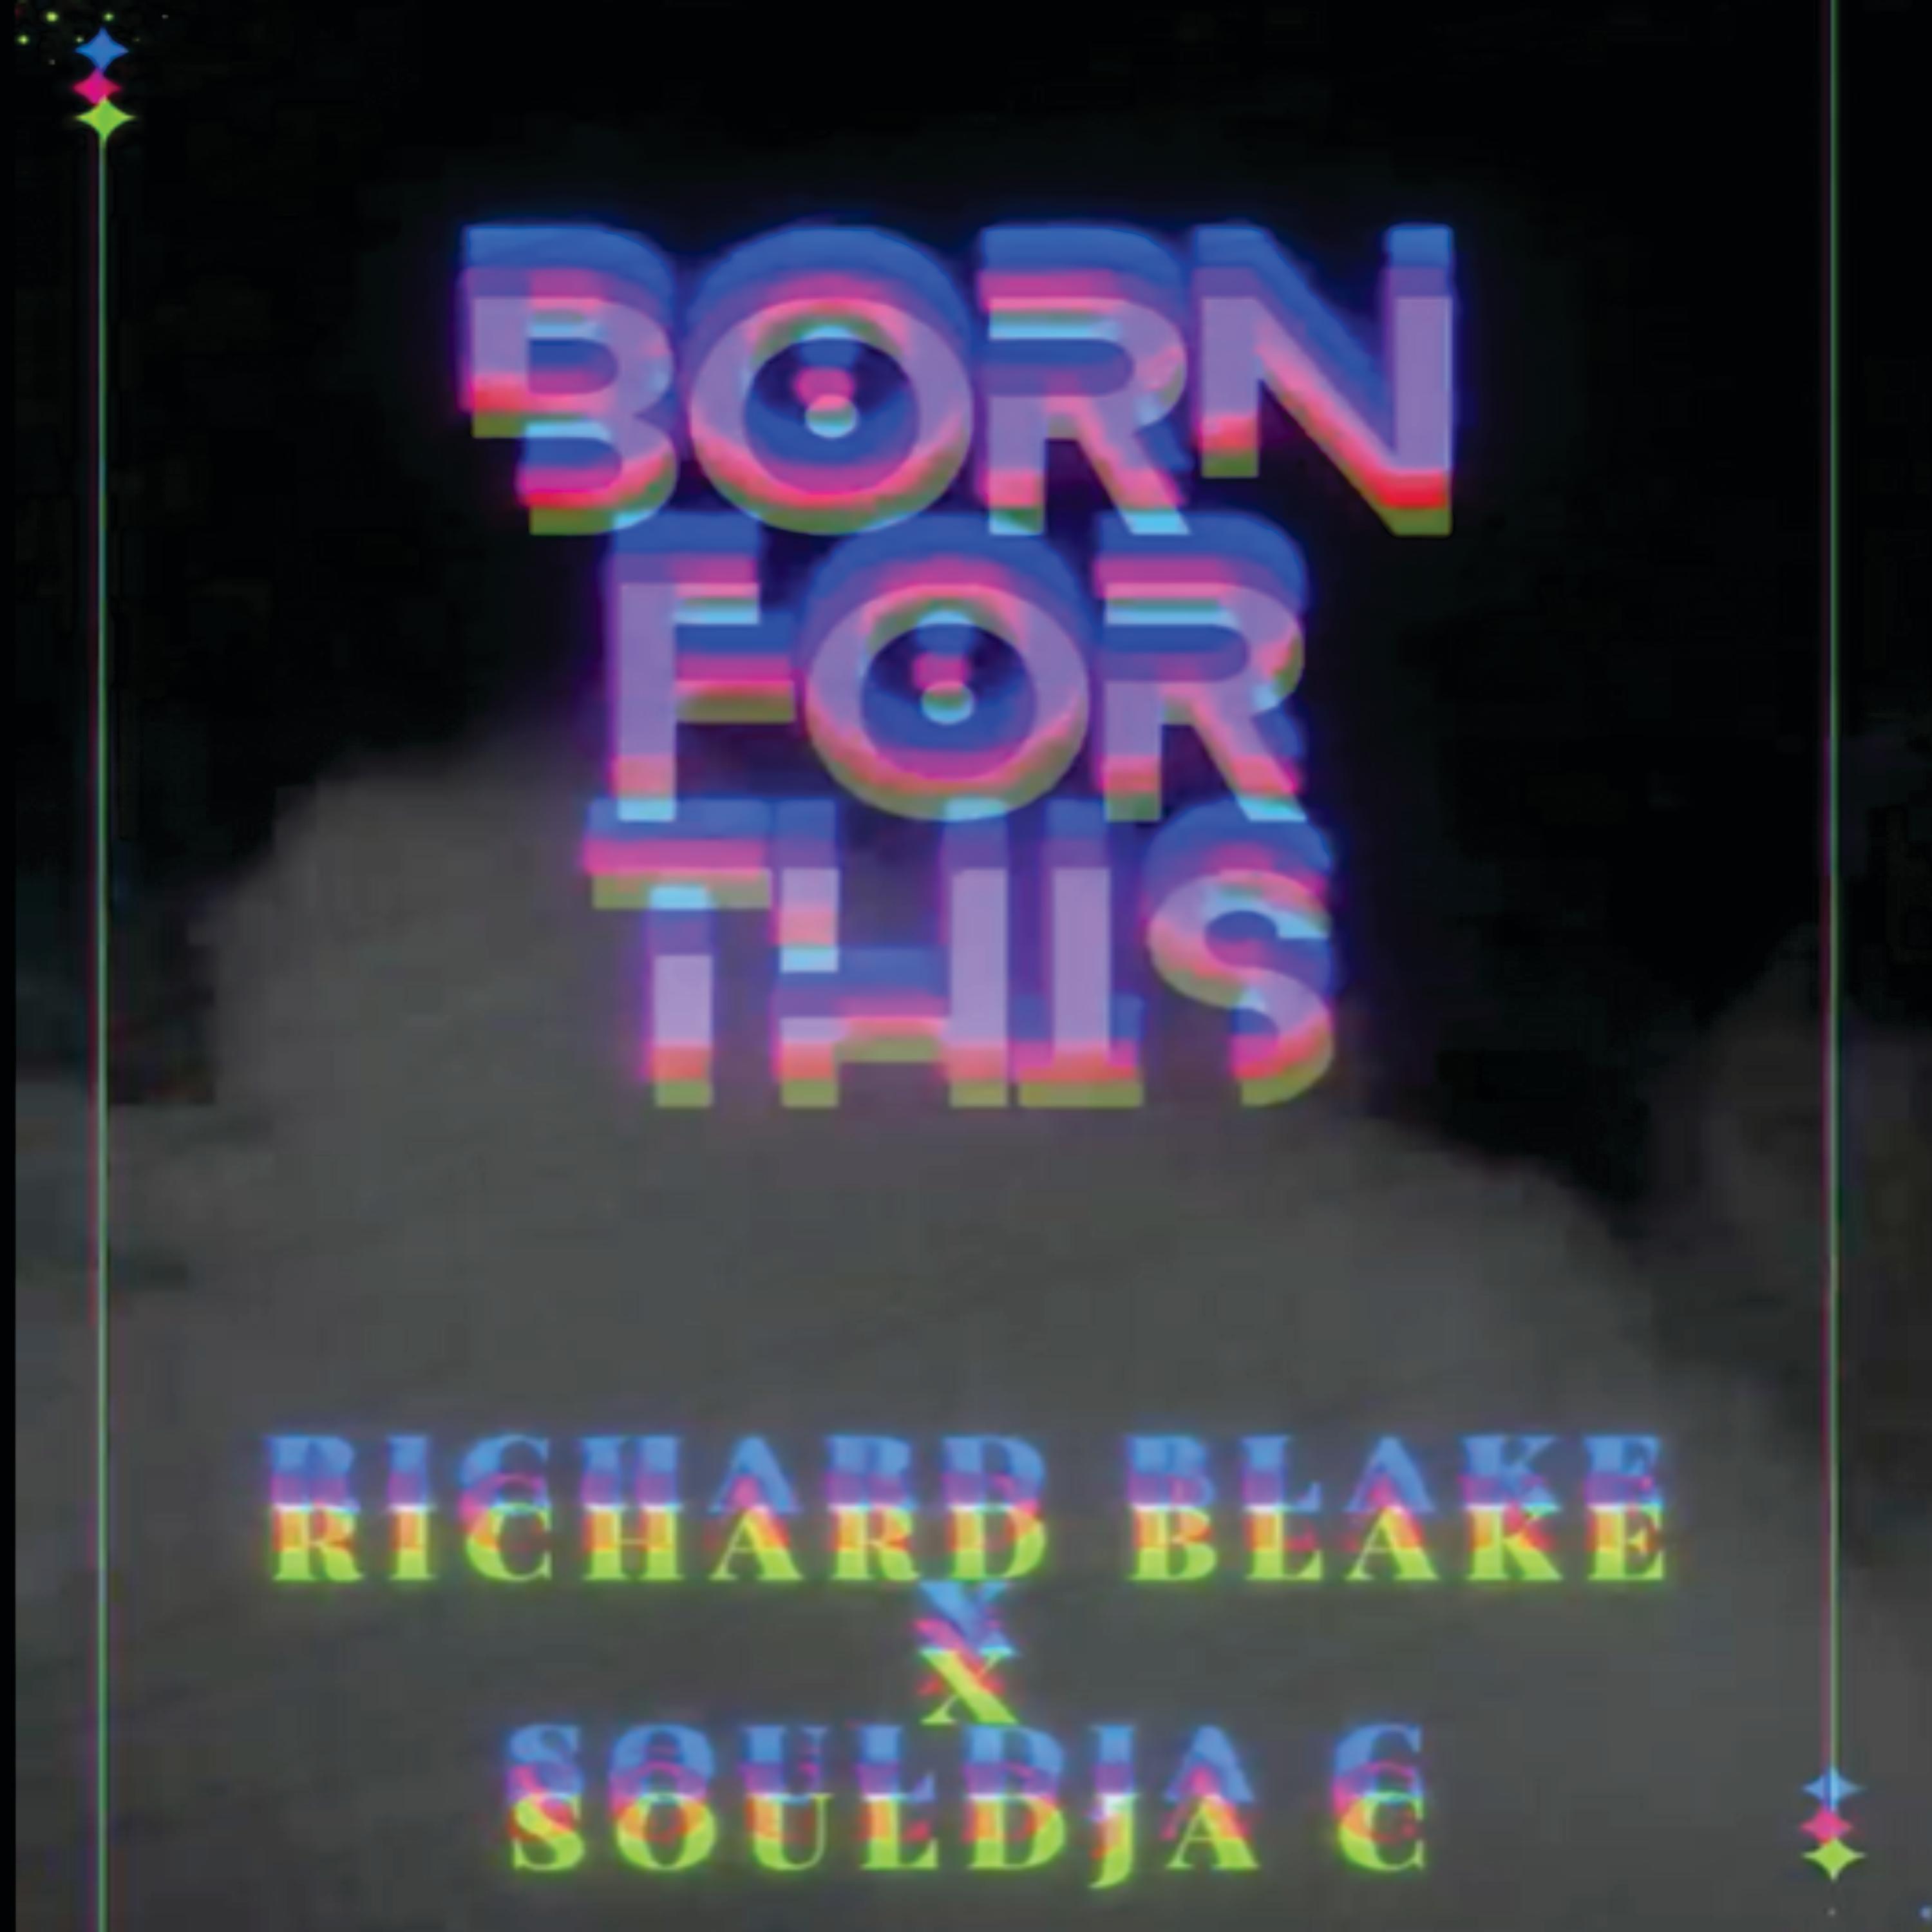 Richard Blake - Born For This (feat. Souldja C)